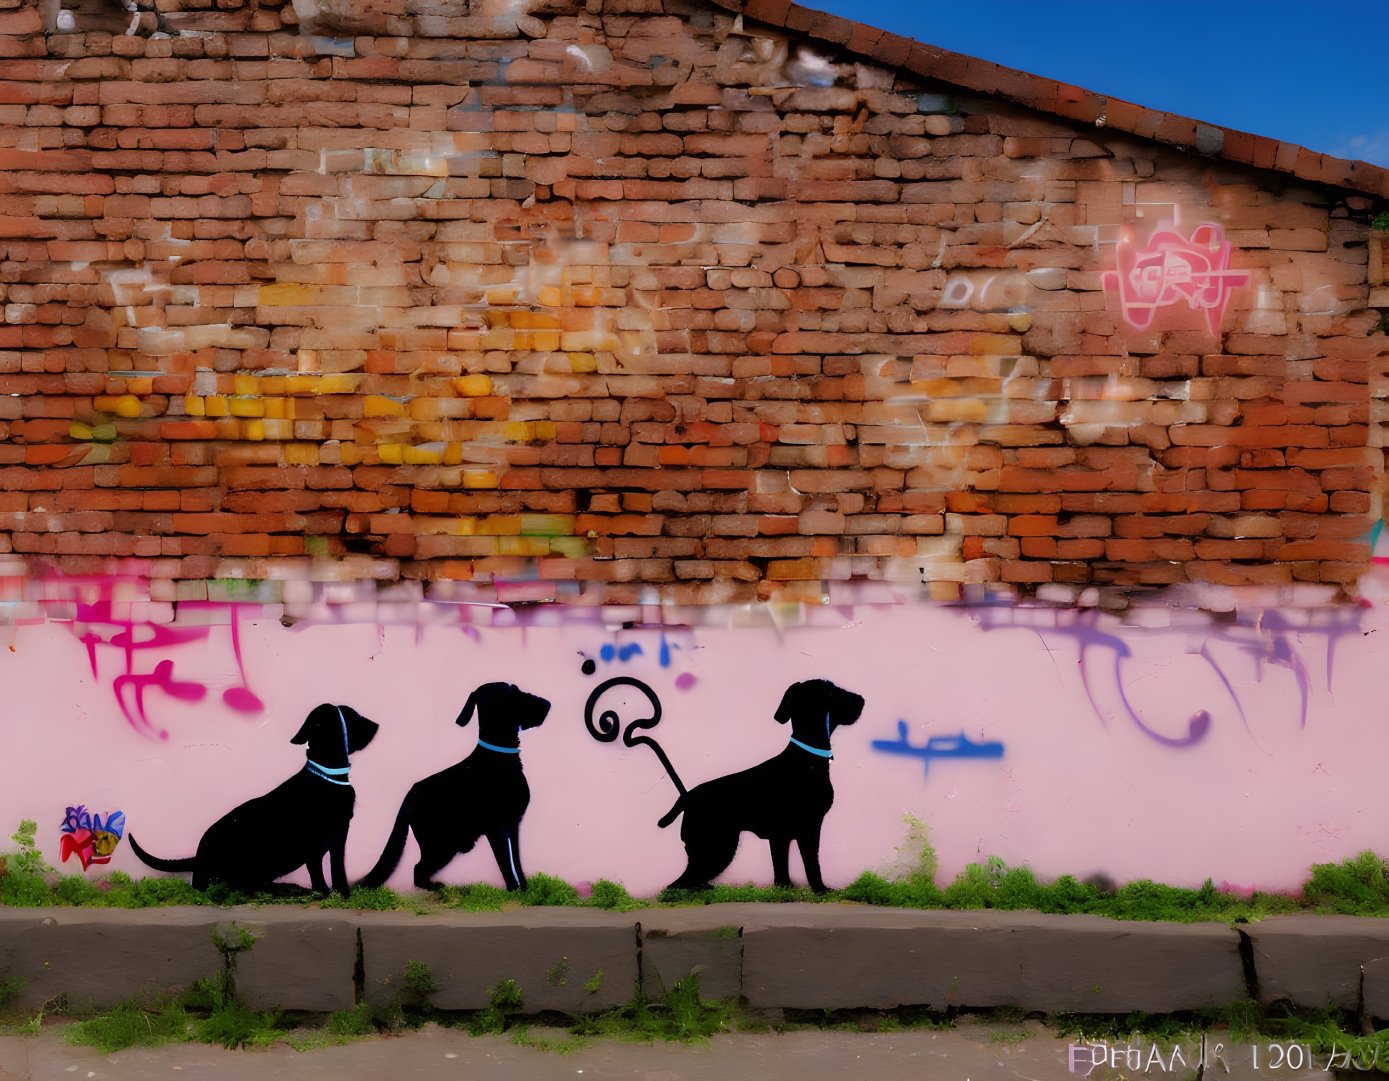 Vibrant graffiti wall with dog silhouettes and tags